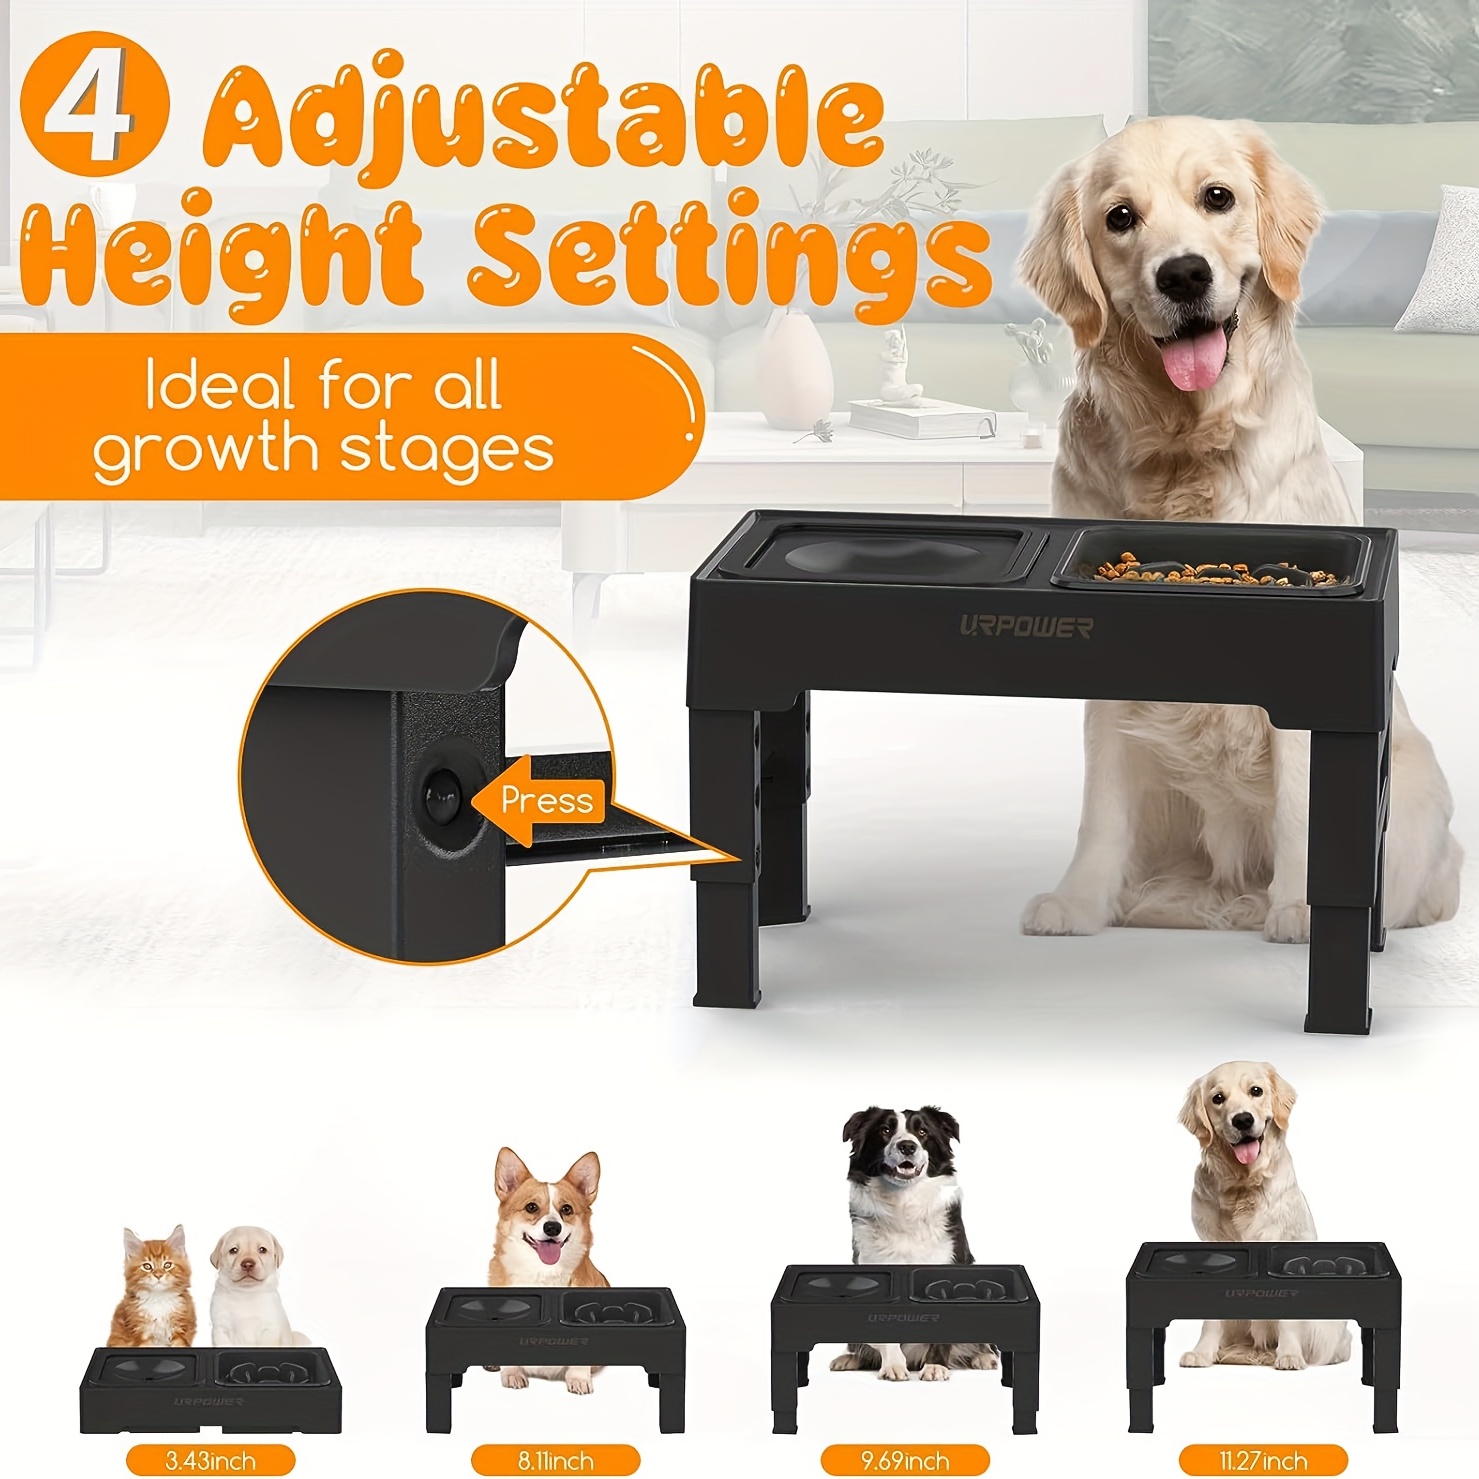 Elevated Dog Food Water Bowl - Raised Dog Bowls with Stand Non Skid -  Double Dog Feeding Bowl